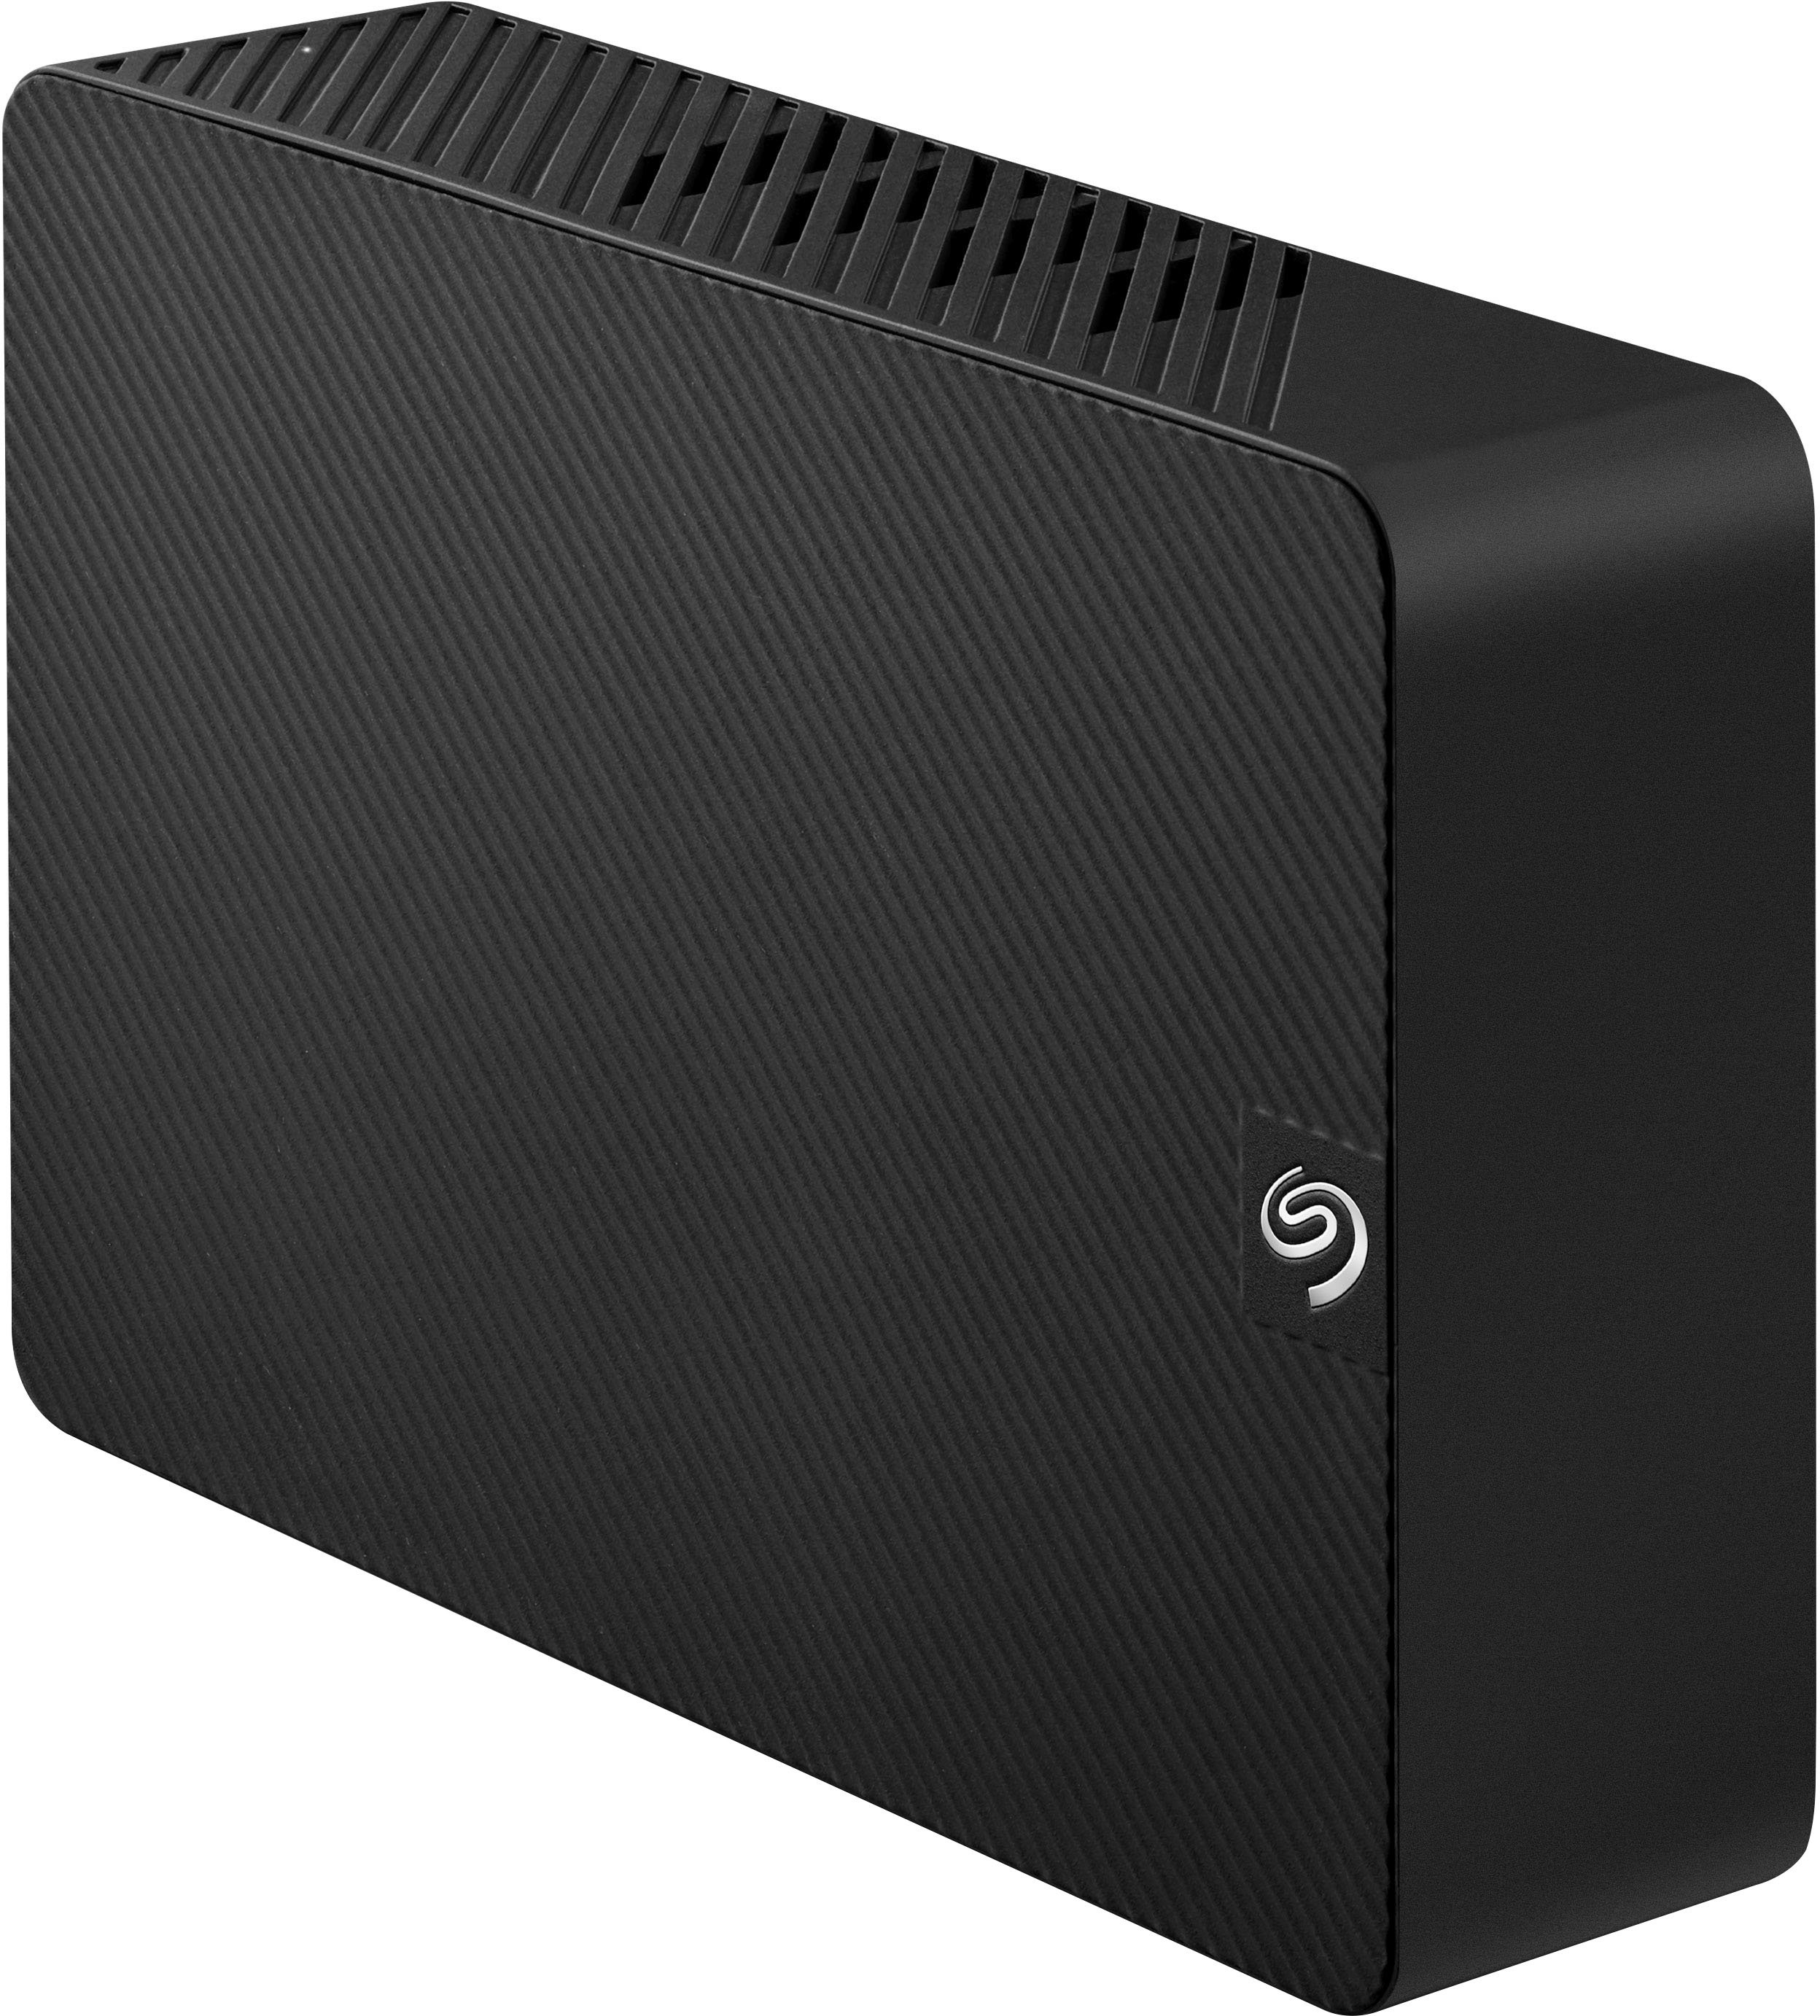 Seagate Expansion 14TB External USB 3.0 Desktop Hard Drive with 